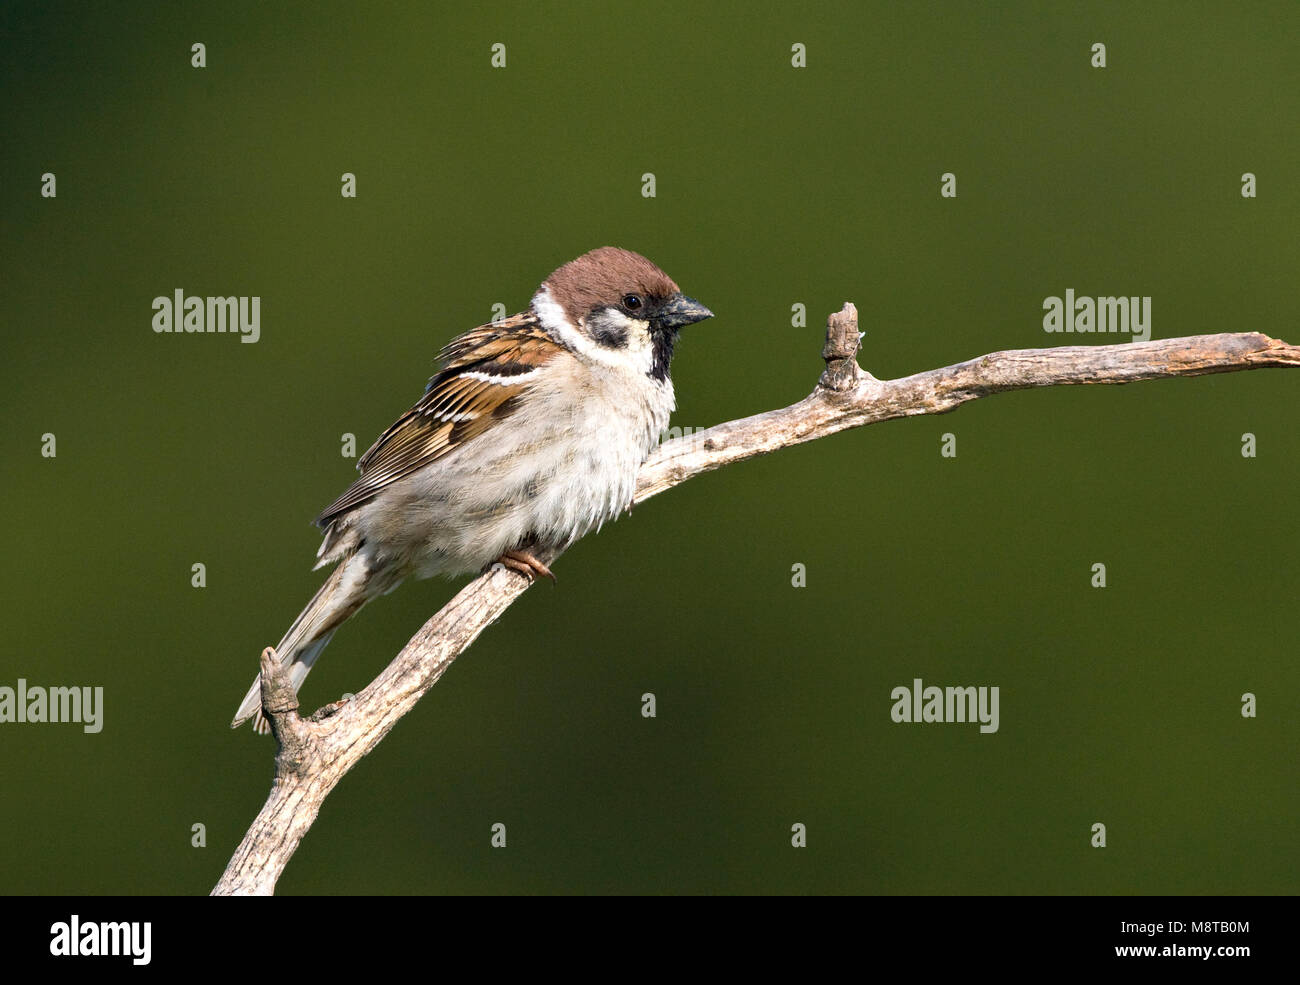 Ringmus zittend op een tak; Eurasian Tree Sparrow perched on branch Stock Photo